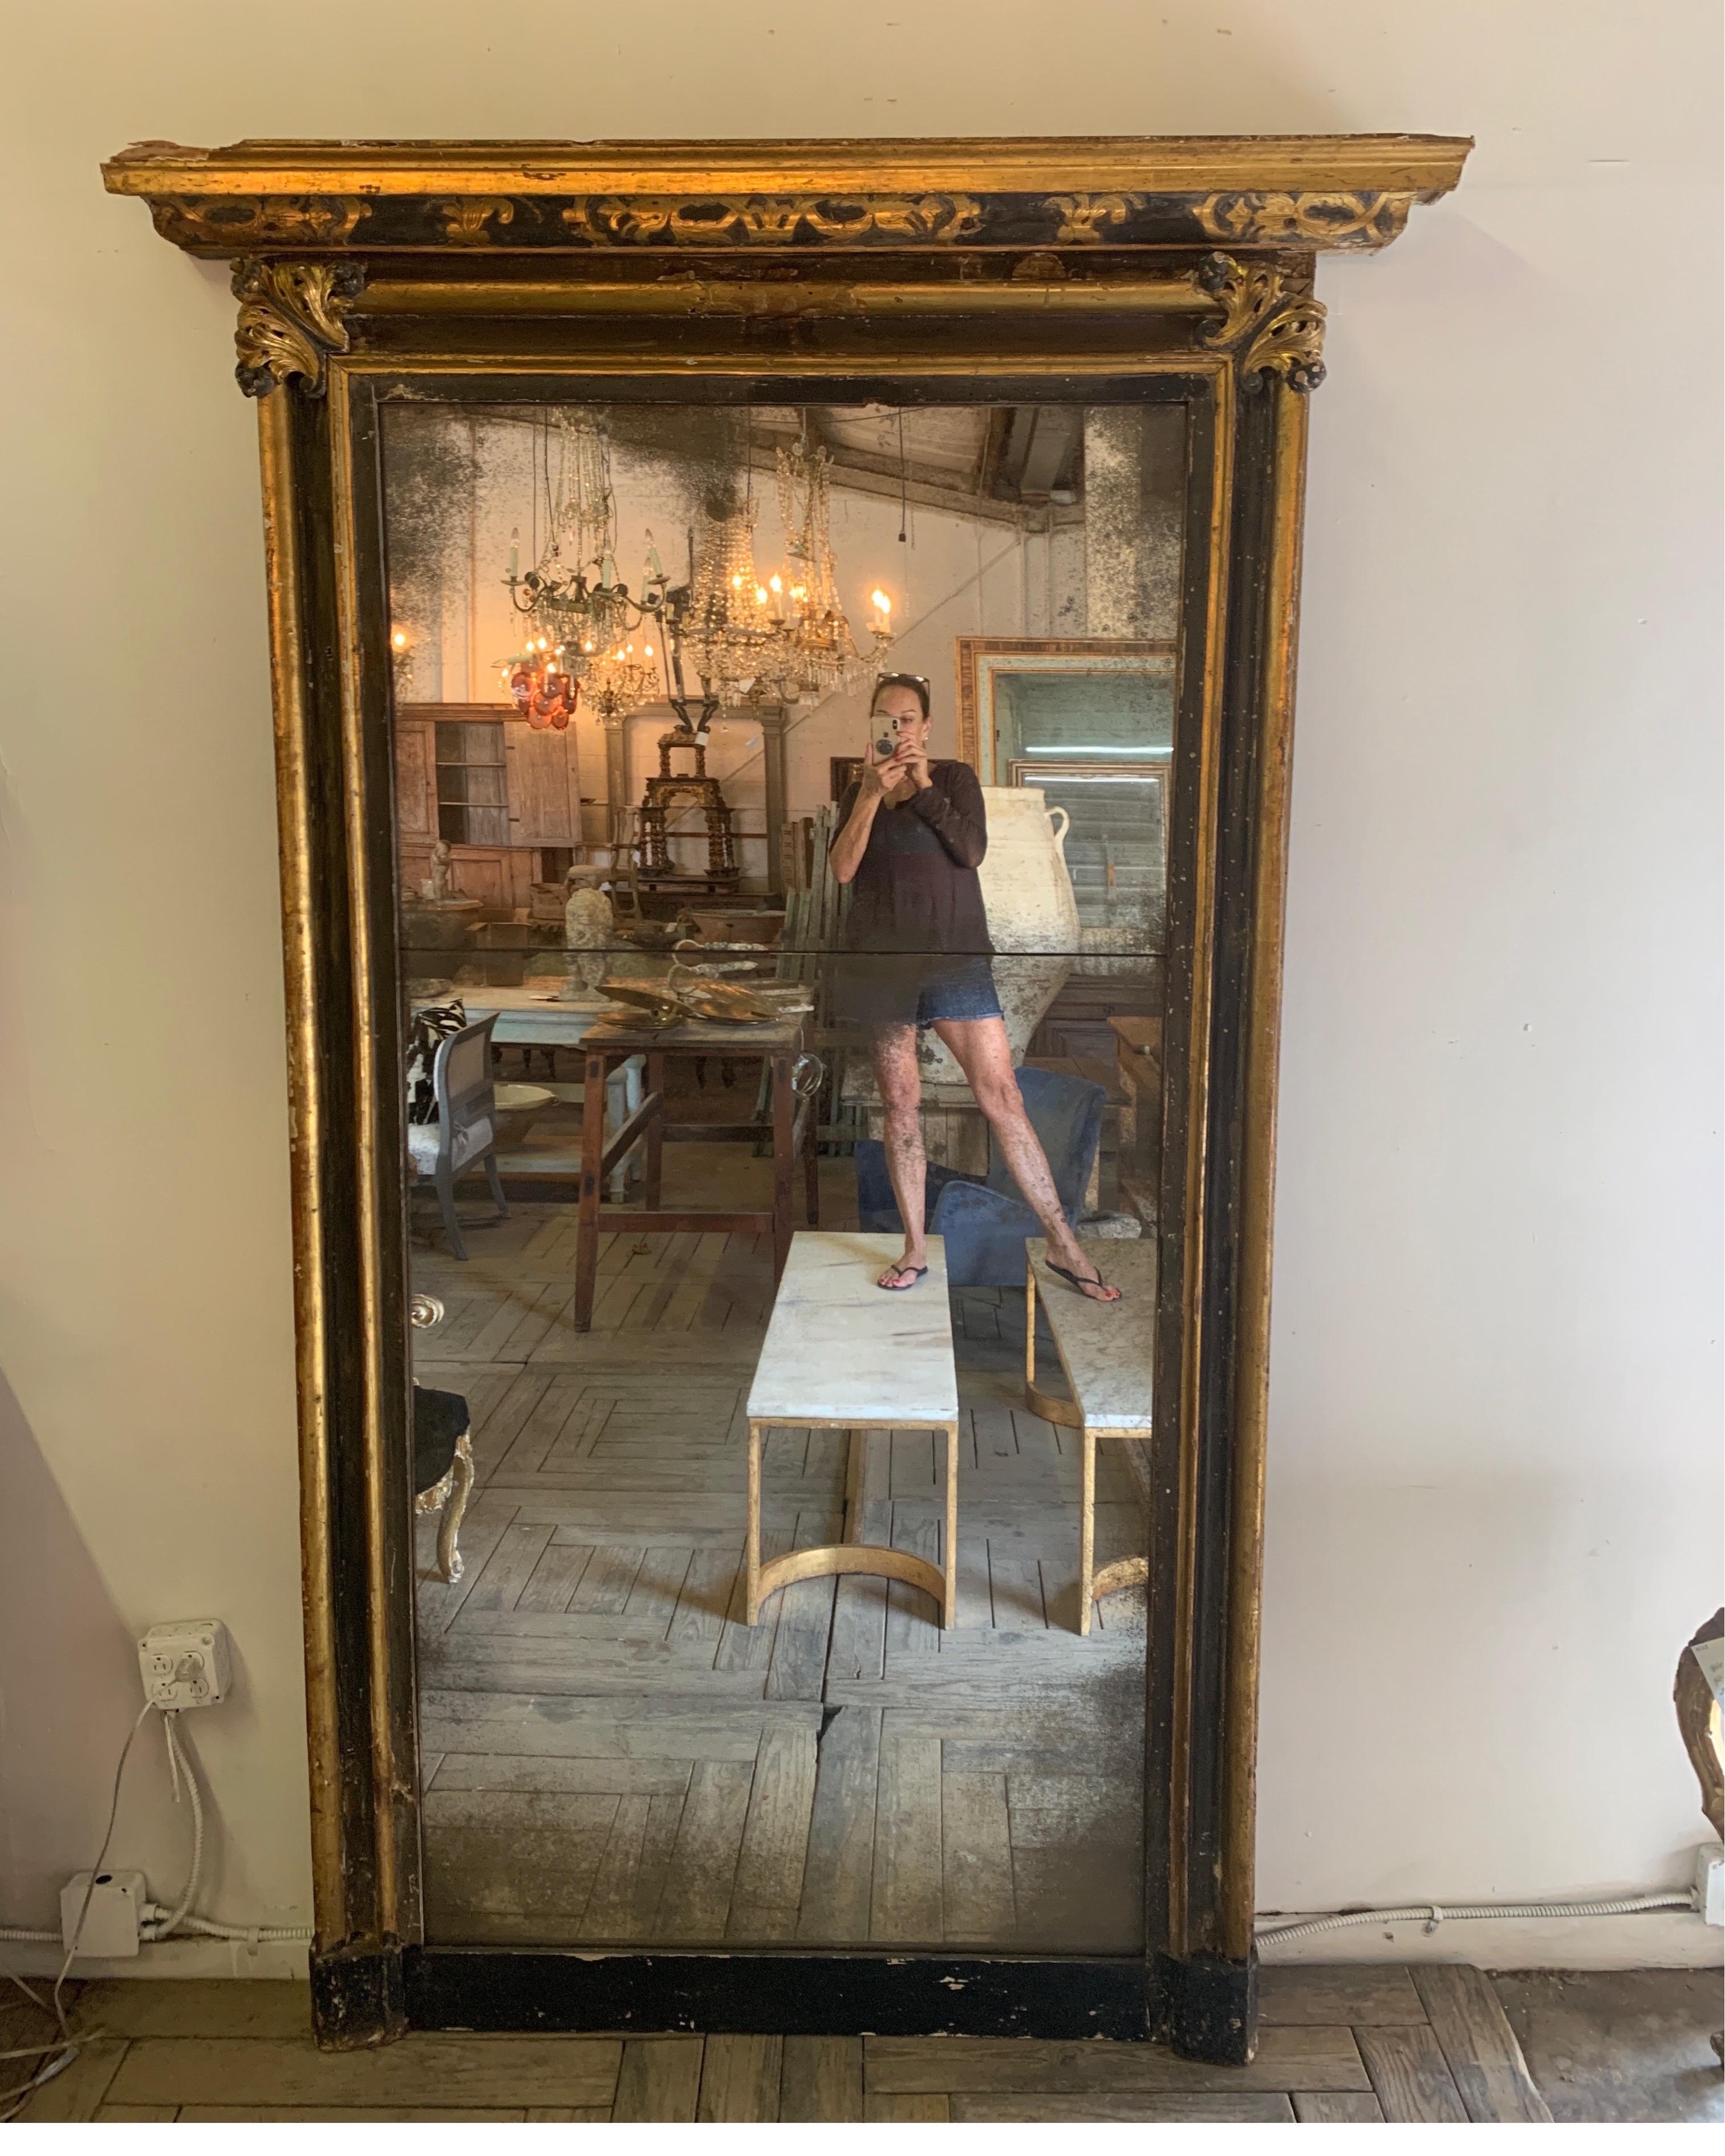 This is a gorgeous floor length mirror from Italy. It is from a Villa in Torino. The mirror is two part aged mirror that has been replaced. The bottom black wood holding the mirror is also a replacement. It’s got incredible wood carving and original